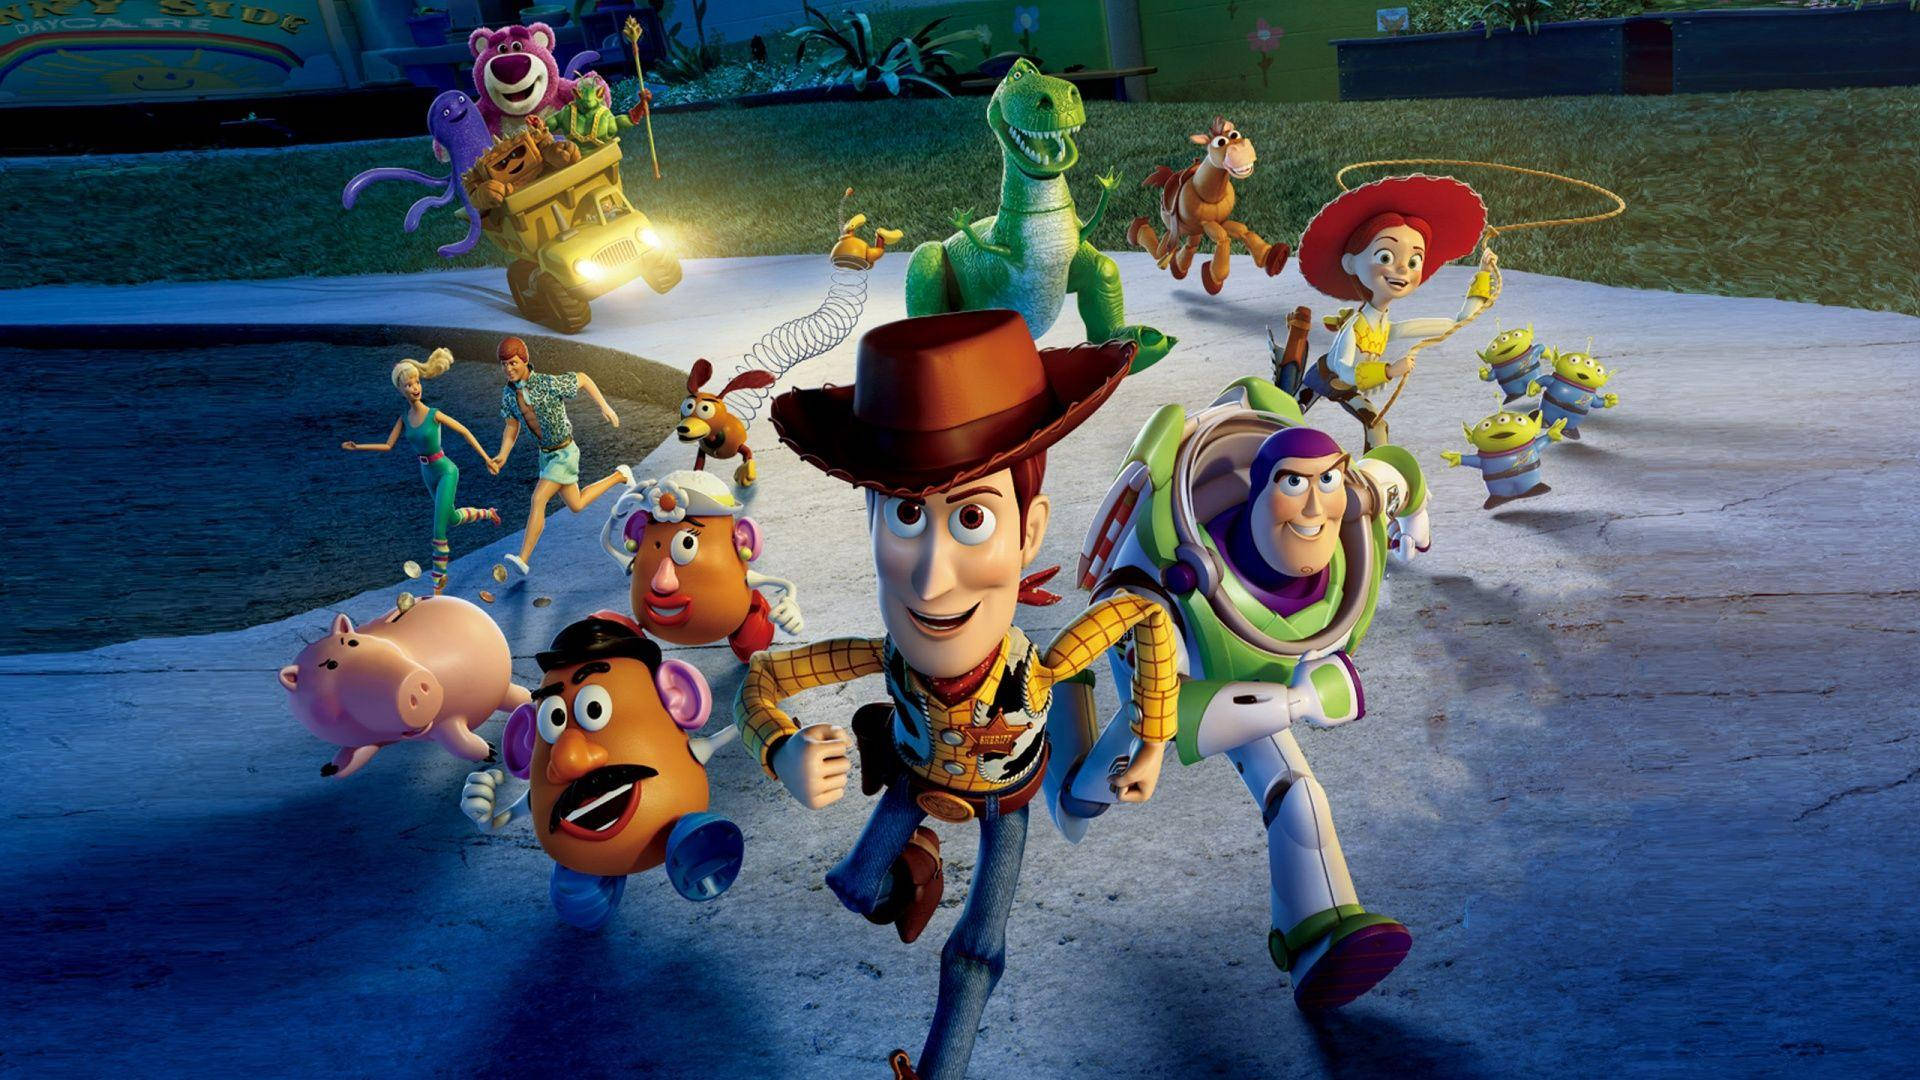 Disney 1920x1080 Hd Toy Story 3 Toys Running Background